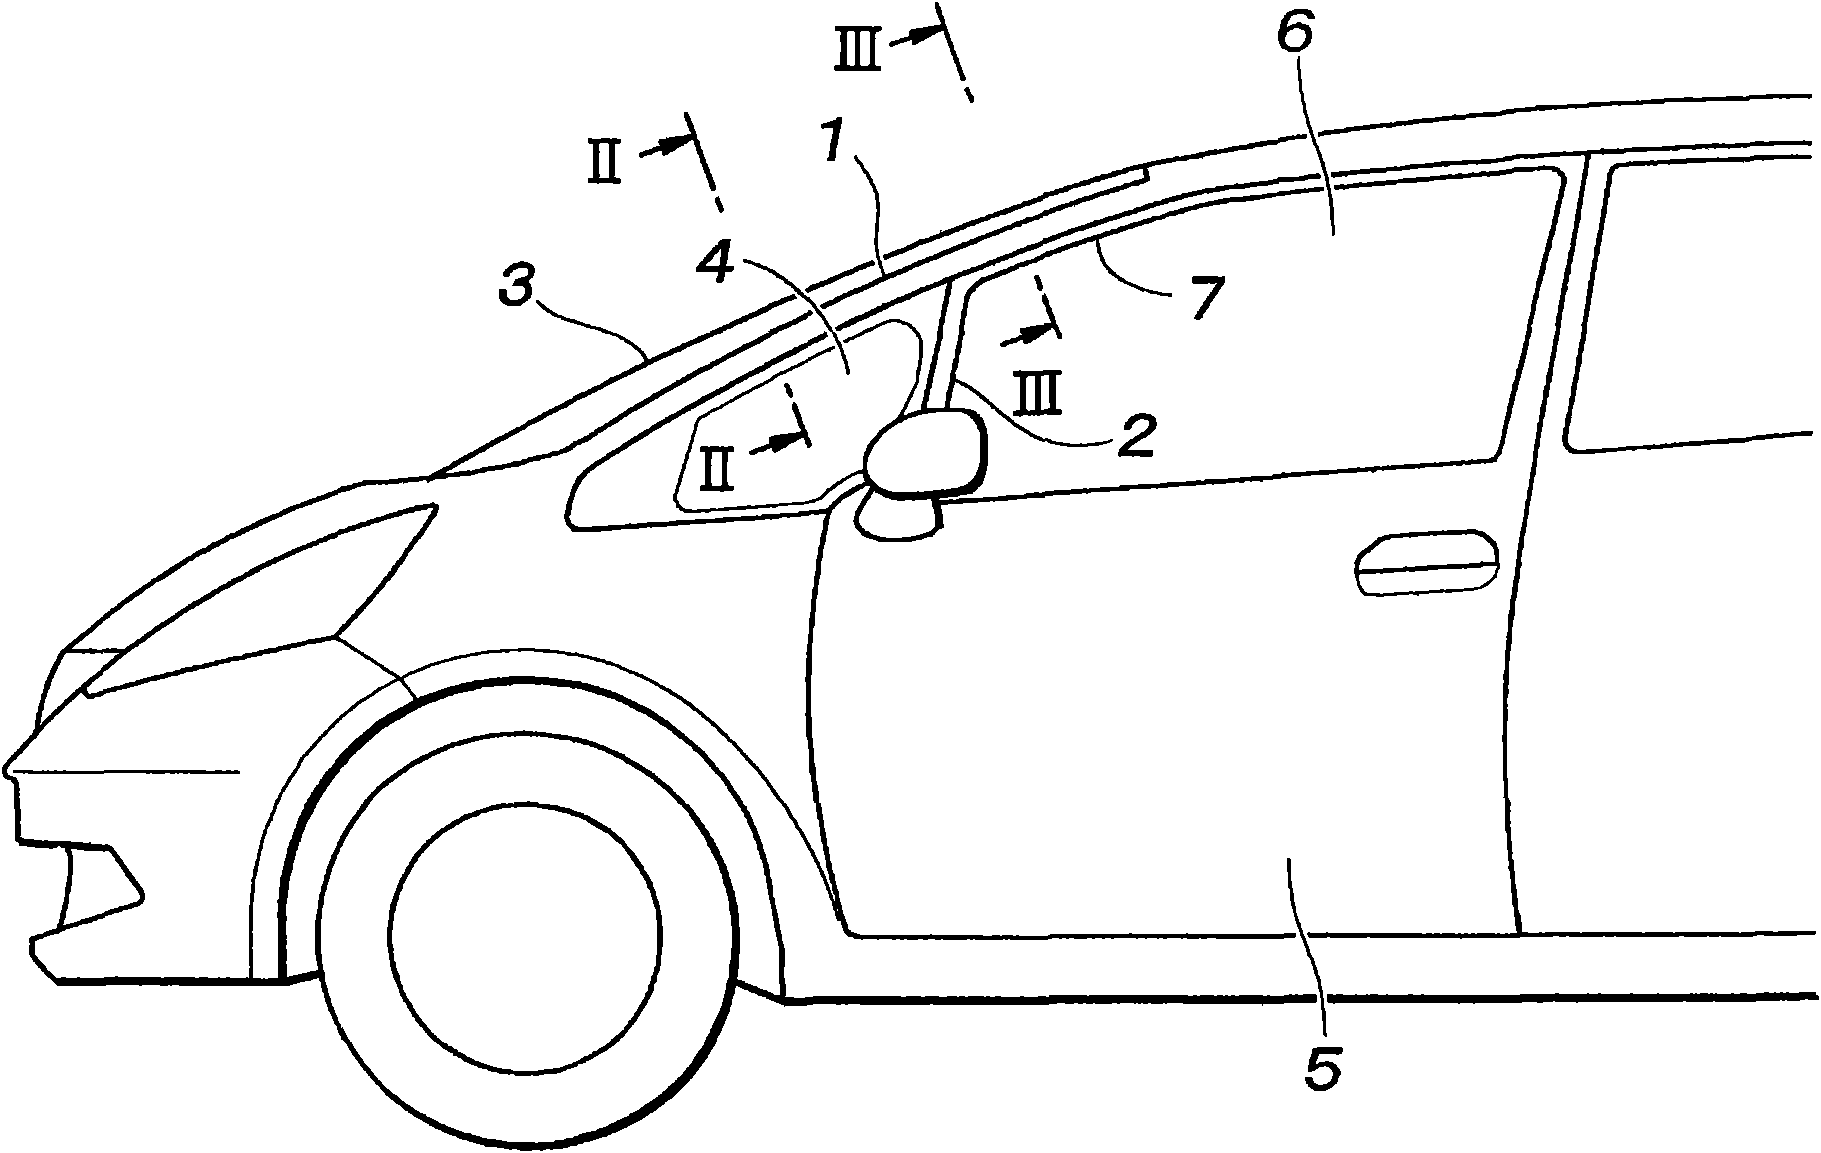 Structure for vehicle body side section